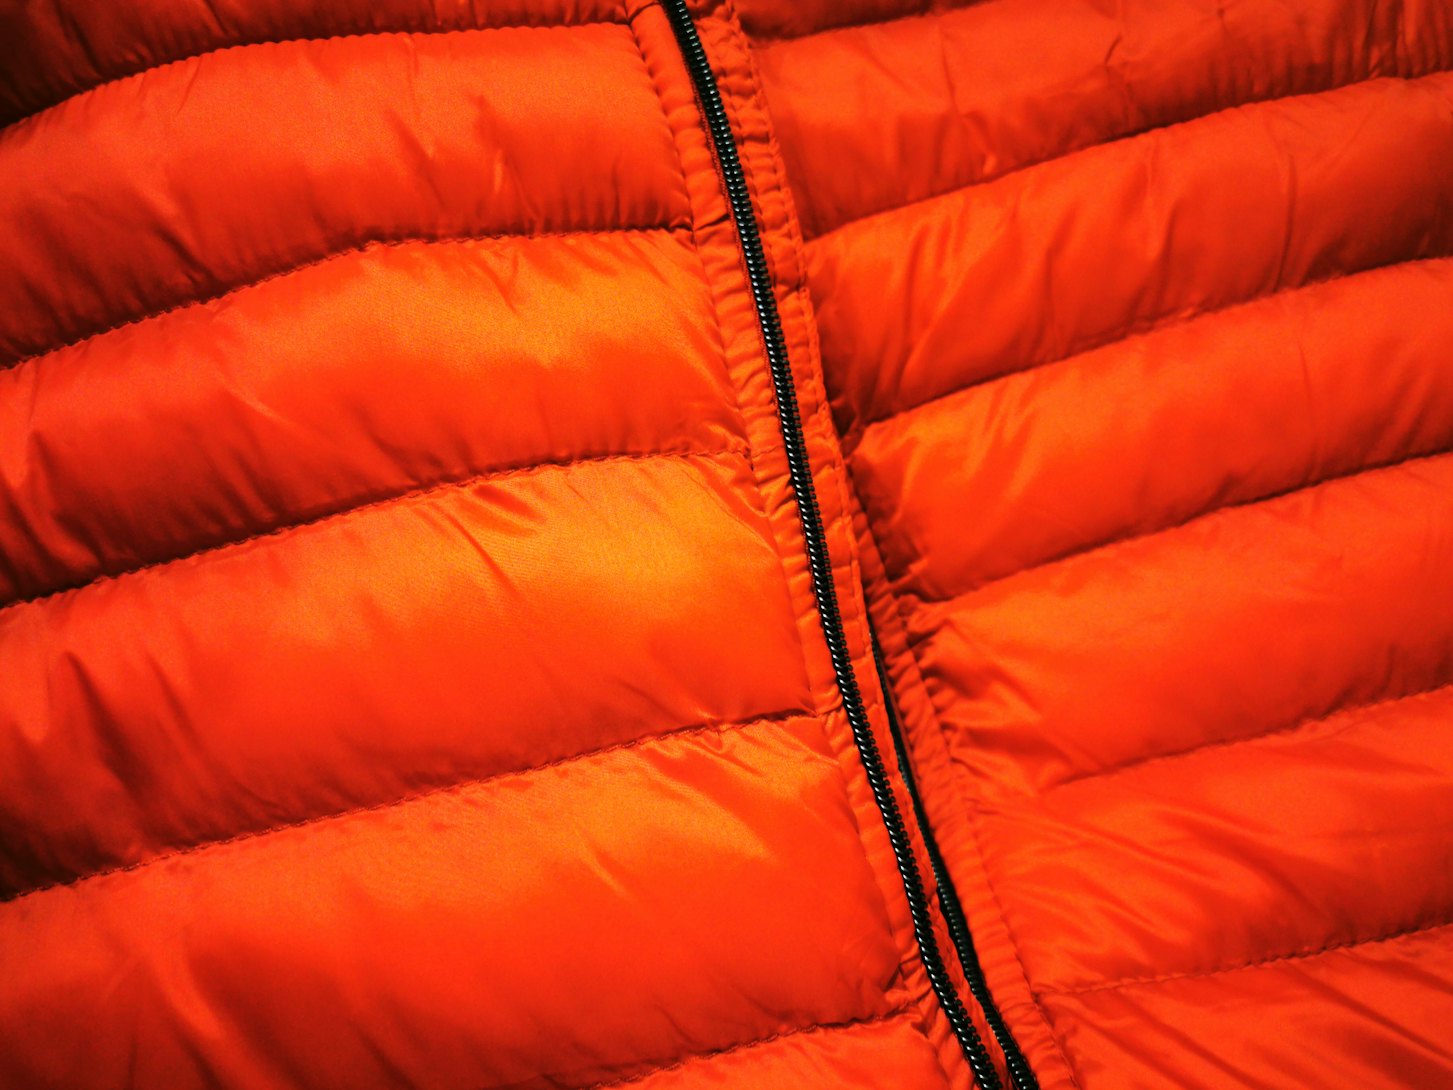 How to buy a down jacket that's actually warm